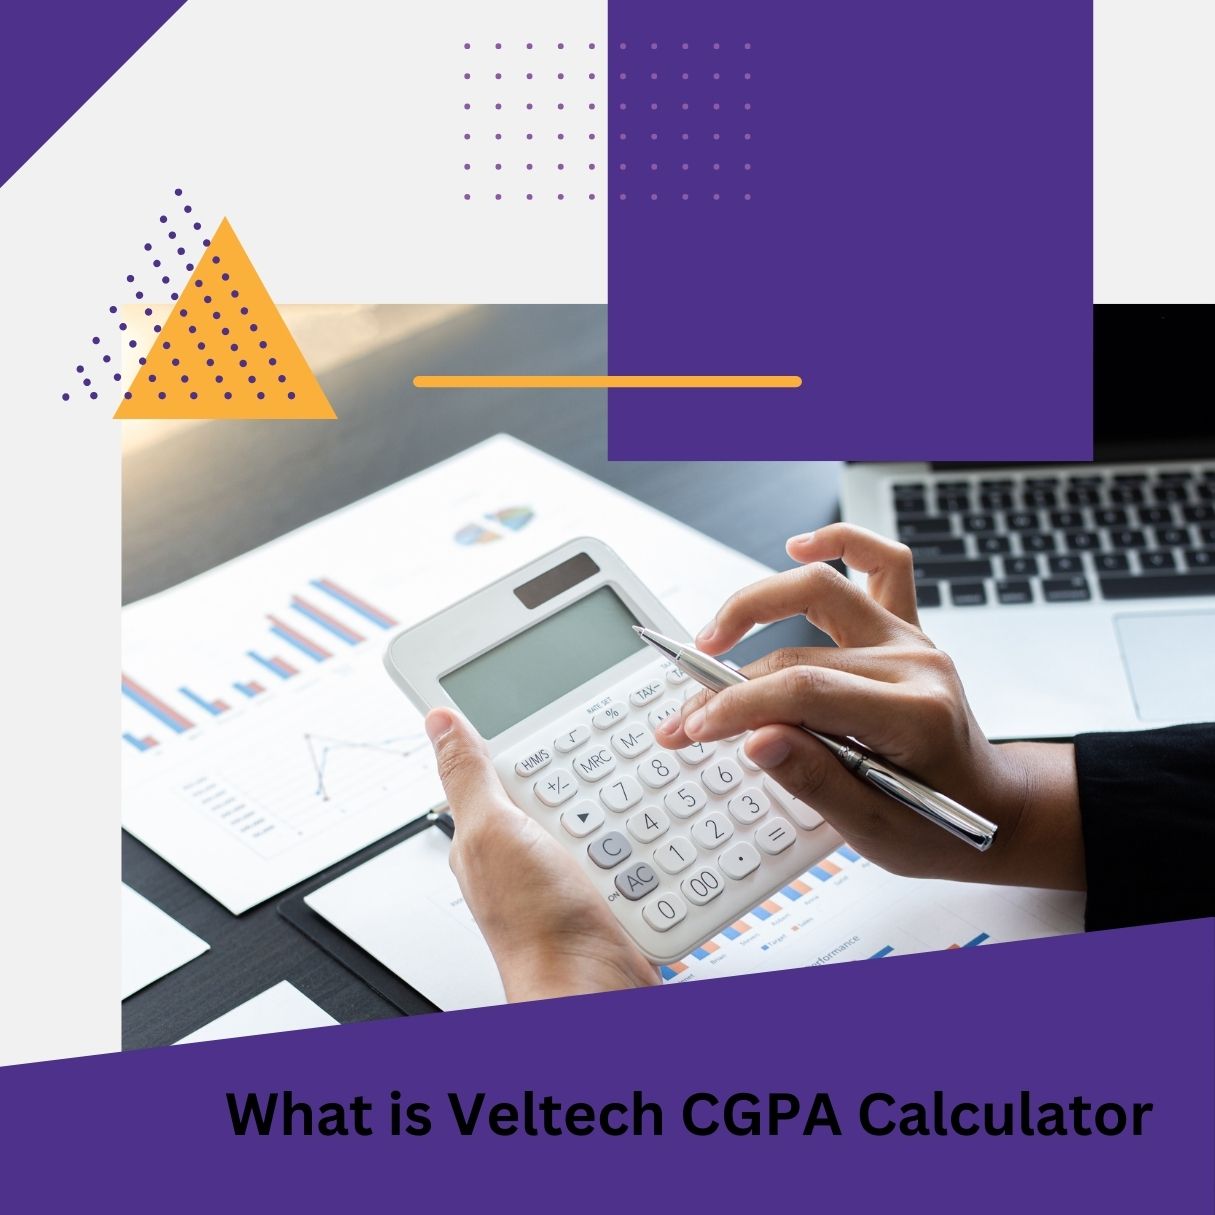 What is Veltech CGPA Calculator